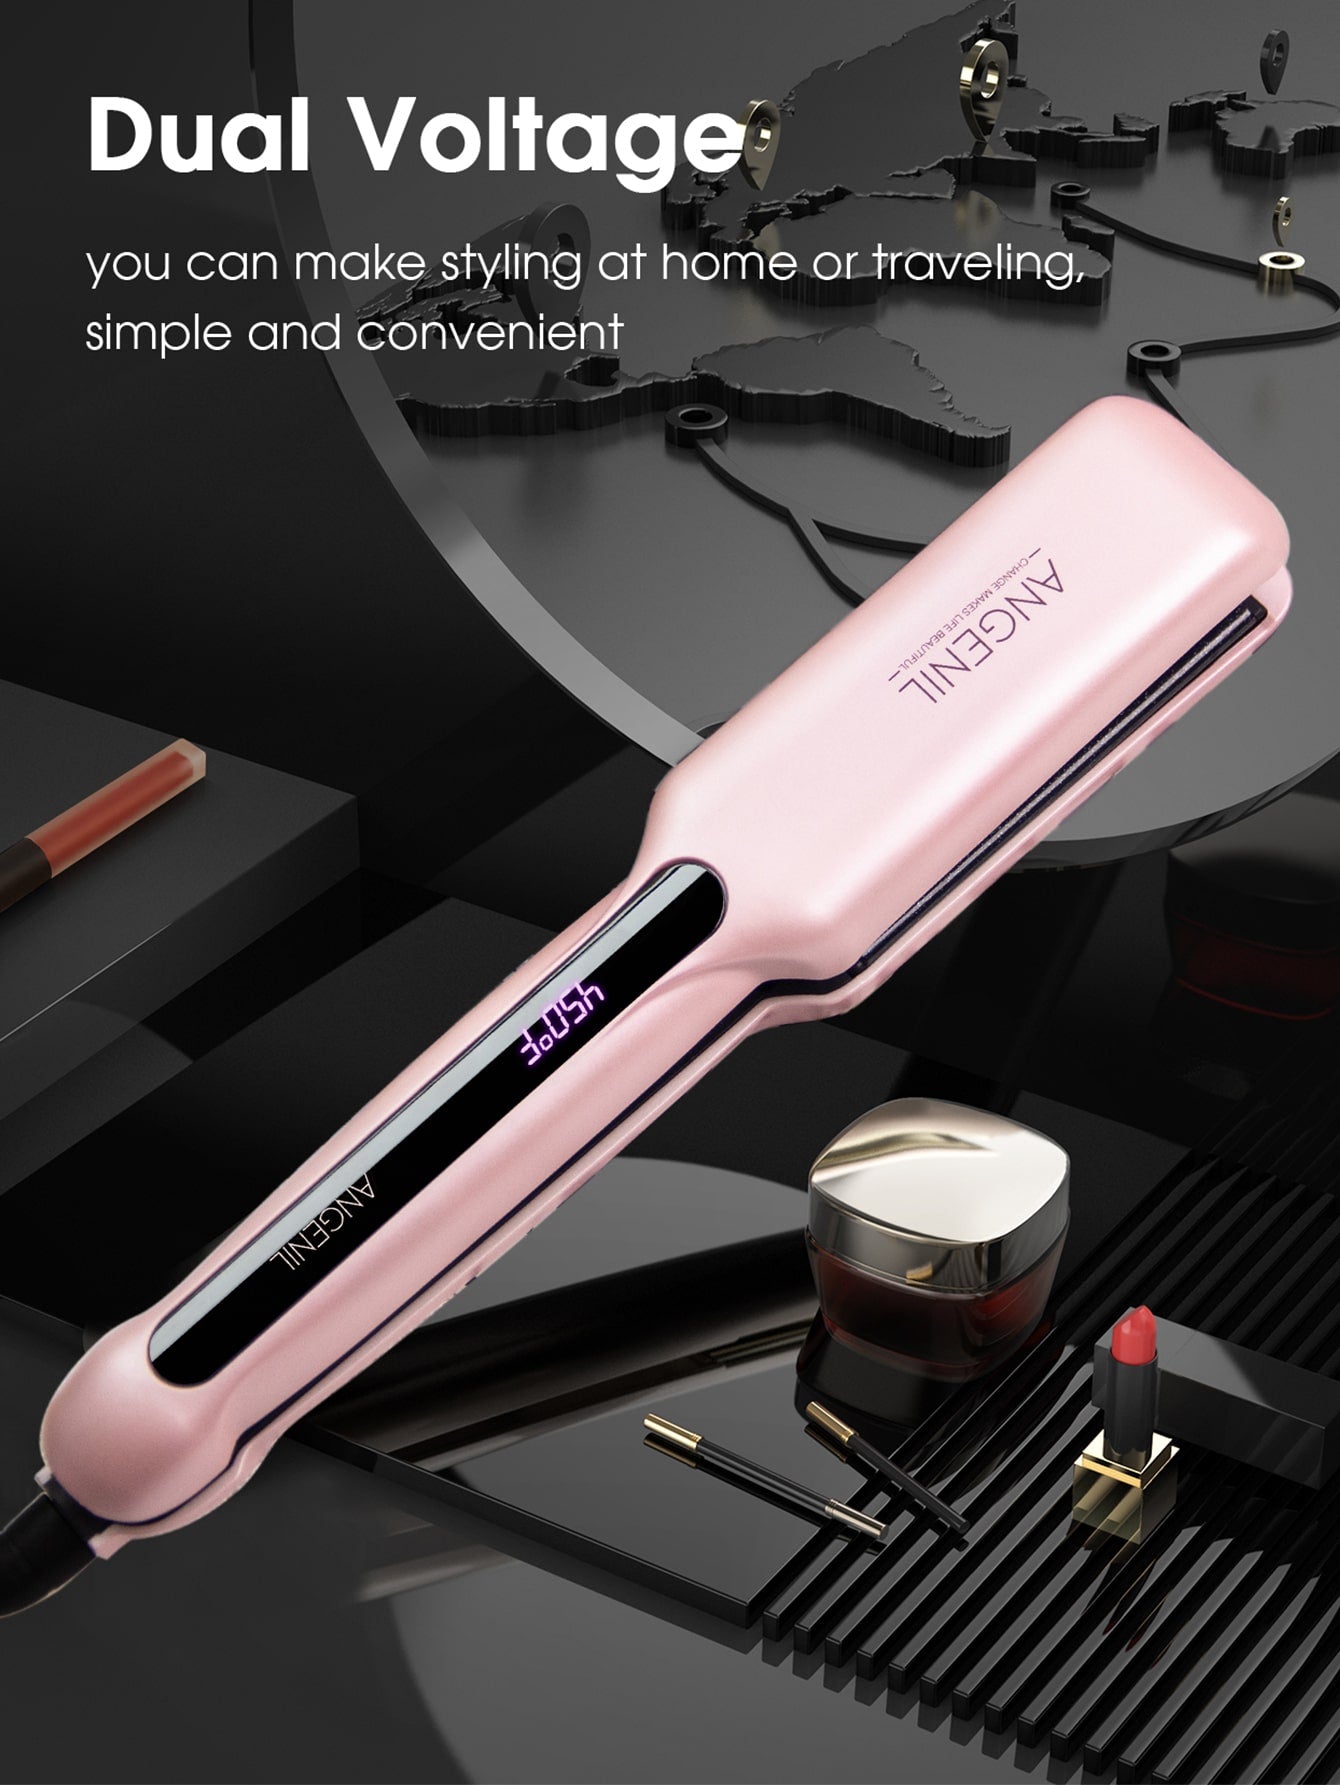 (AU)ANGENIL Argan Oil Flat Iron Curling Iron in One, Professional Portable Dual Voltage Ceramic Hair Straightener, 1.6 Inch Wide Flat Iron for Thick Hair, Fast Straightening Styling, LCD Display-Pink-4